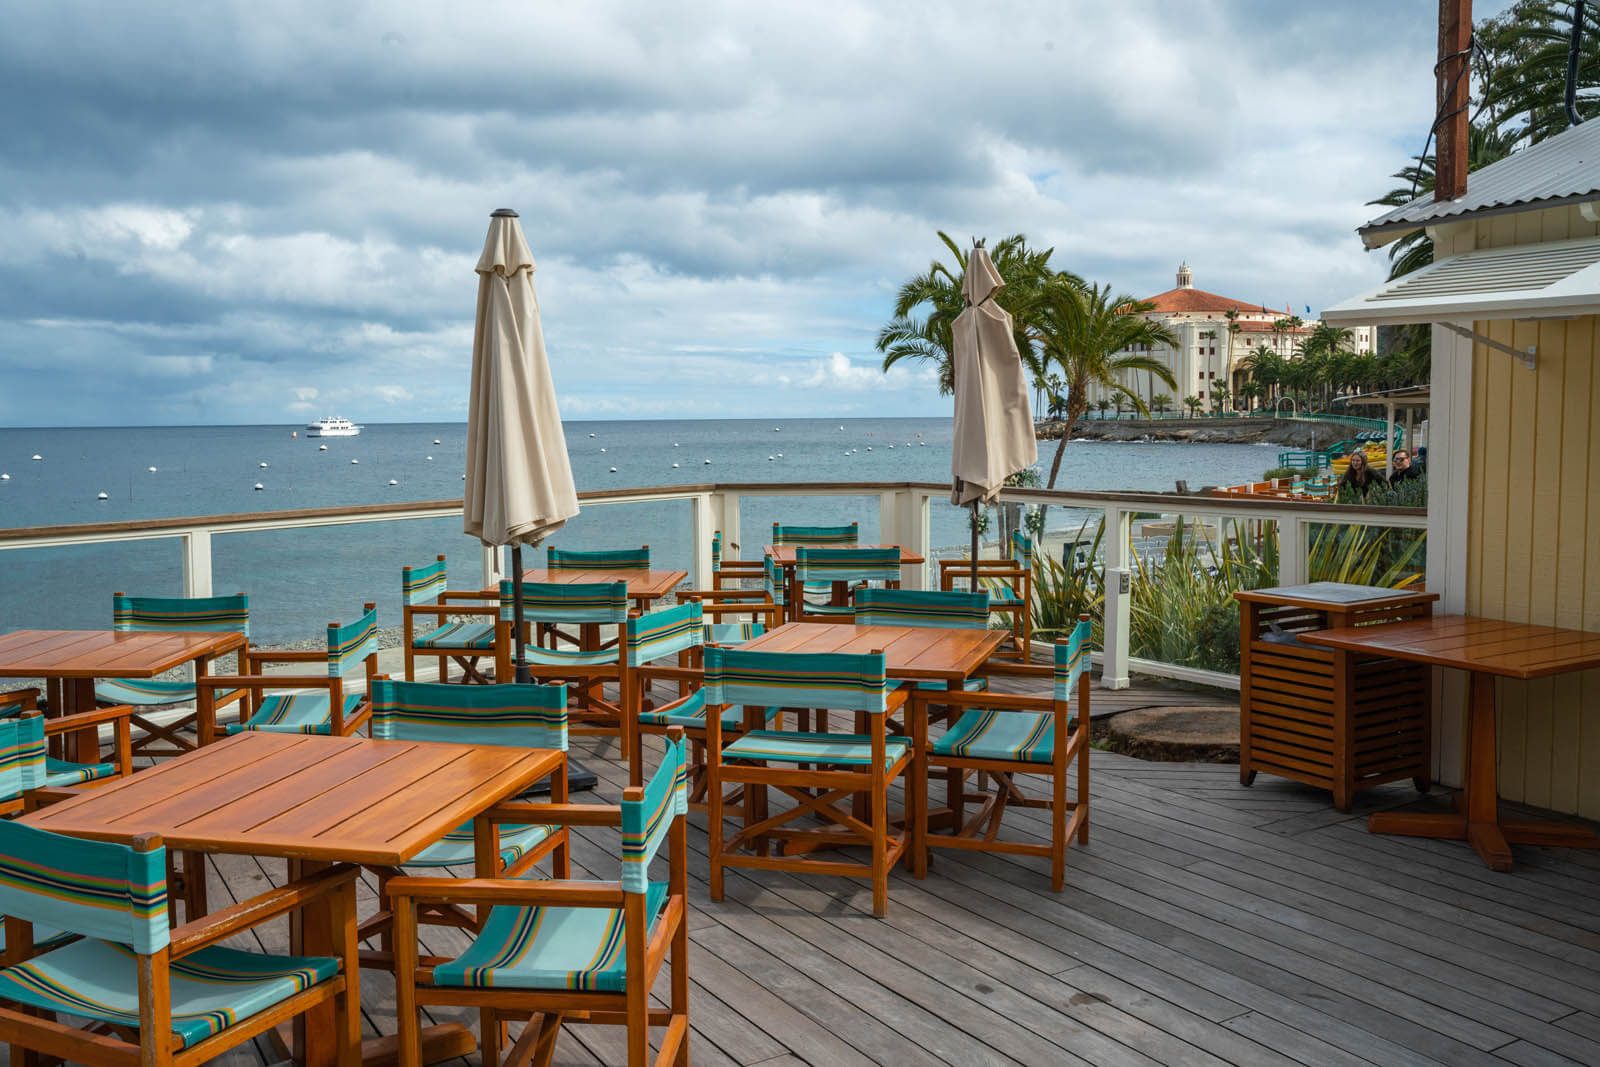 the outdoor patio and deck with casino view at Descanso Beach Club on Catalina Island in California